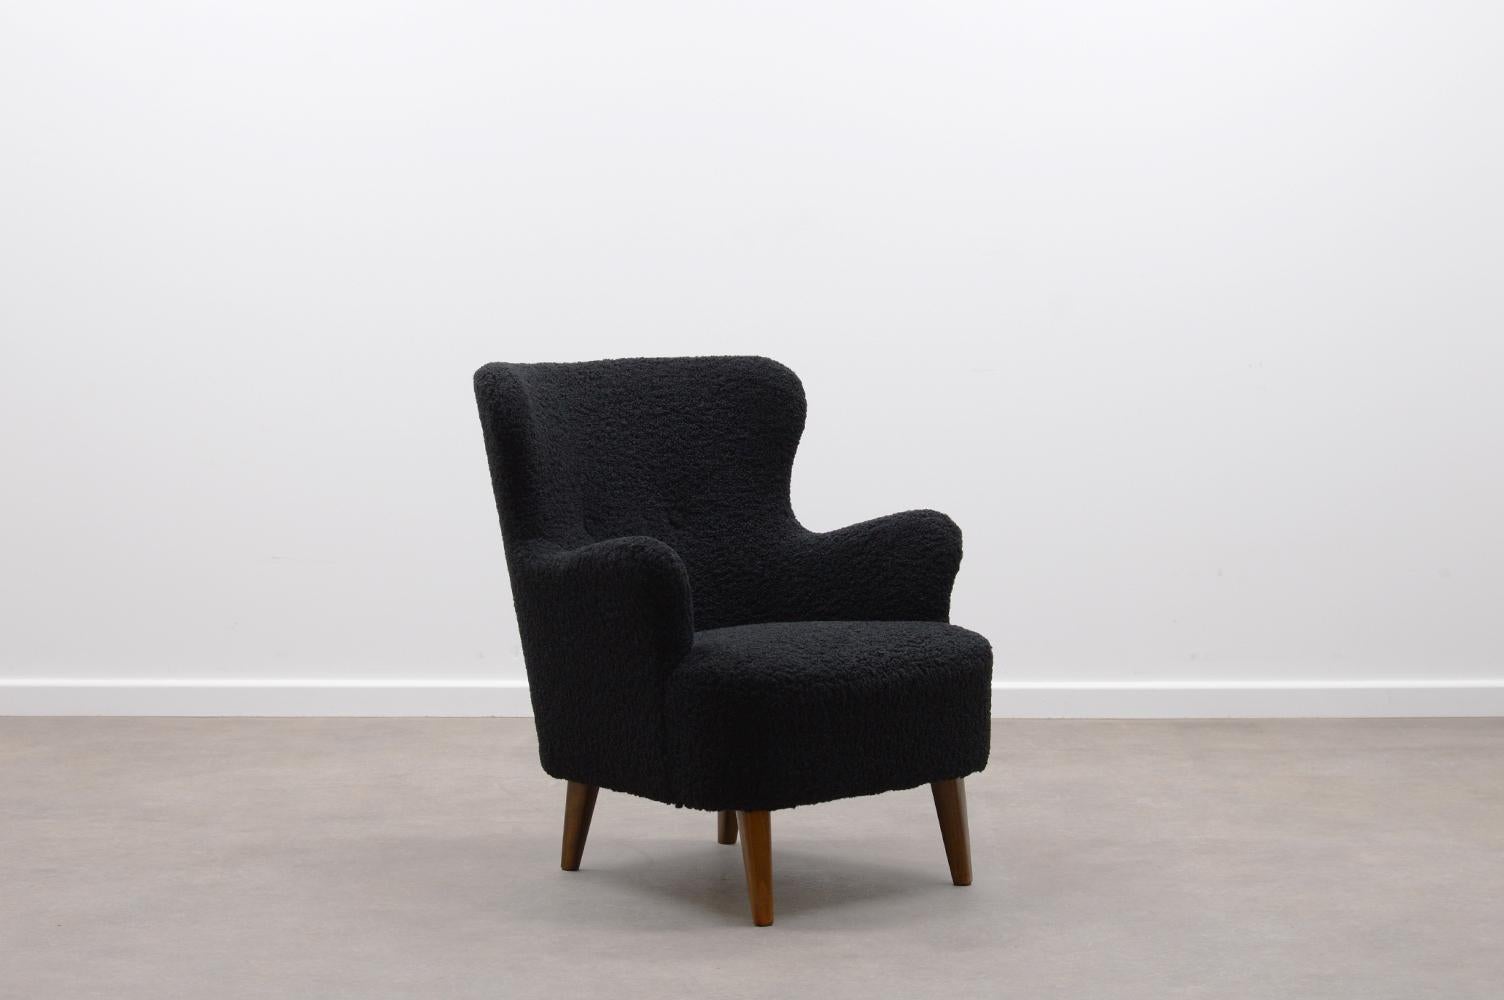 Wingback chair by Theo Ruth for Artifort, 50’s Netherlands. Classic model reupholstered in a thick black teddy fabric and solid wooden legs. Inn very good condition. 

